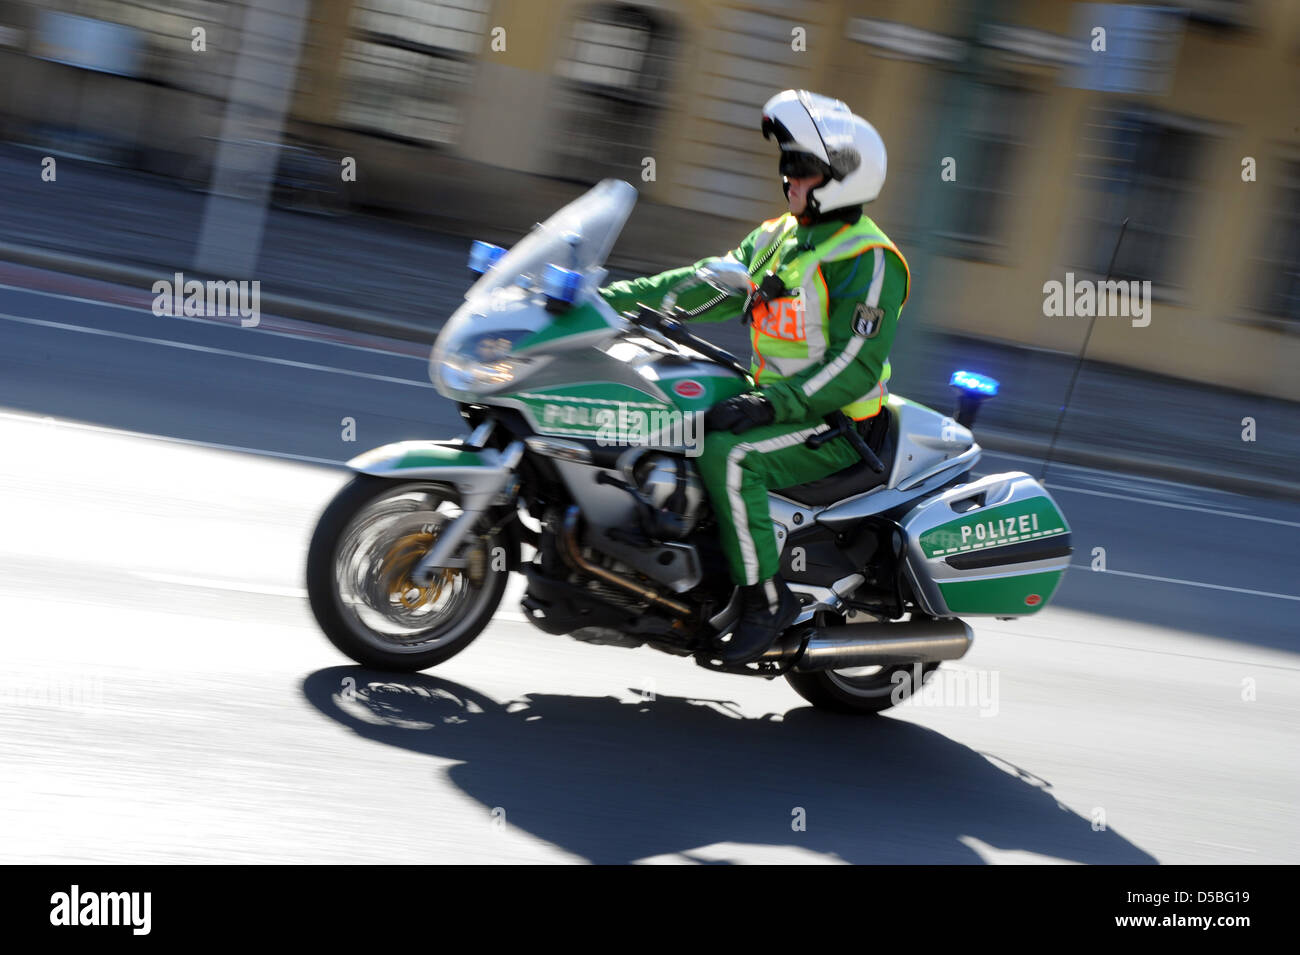 Berlin, Germany, Berlin motorcycle police in action Stock Photo